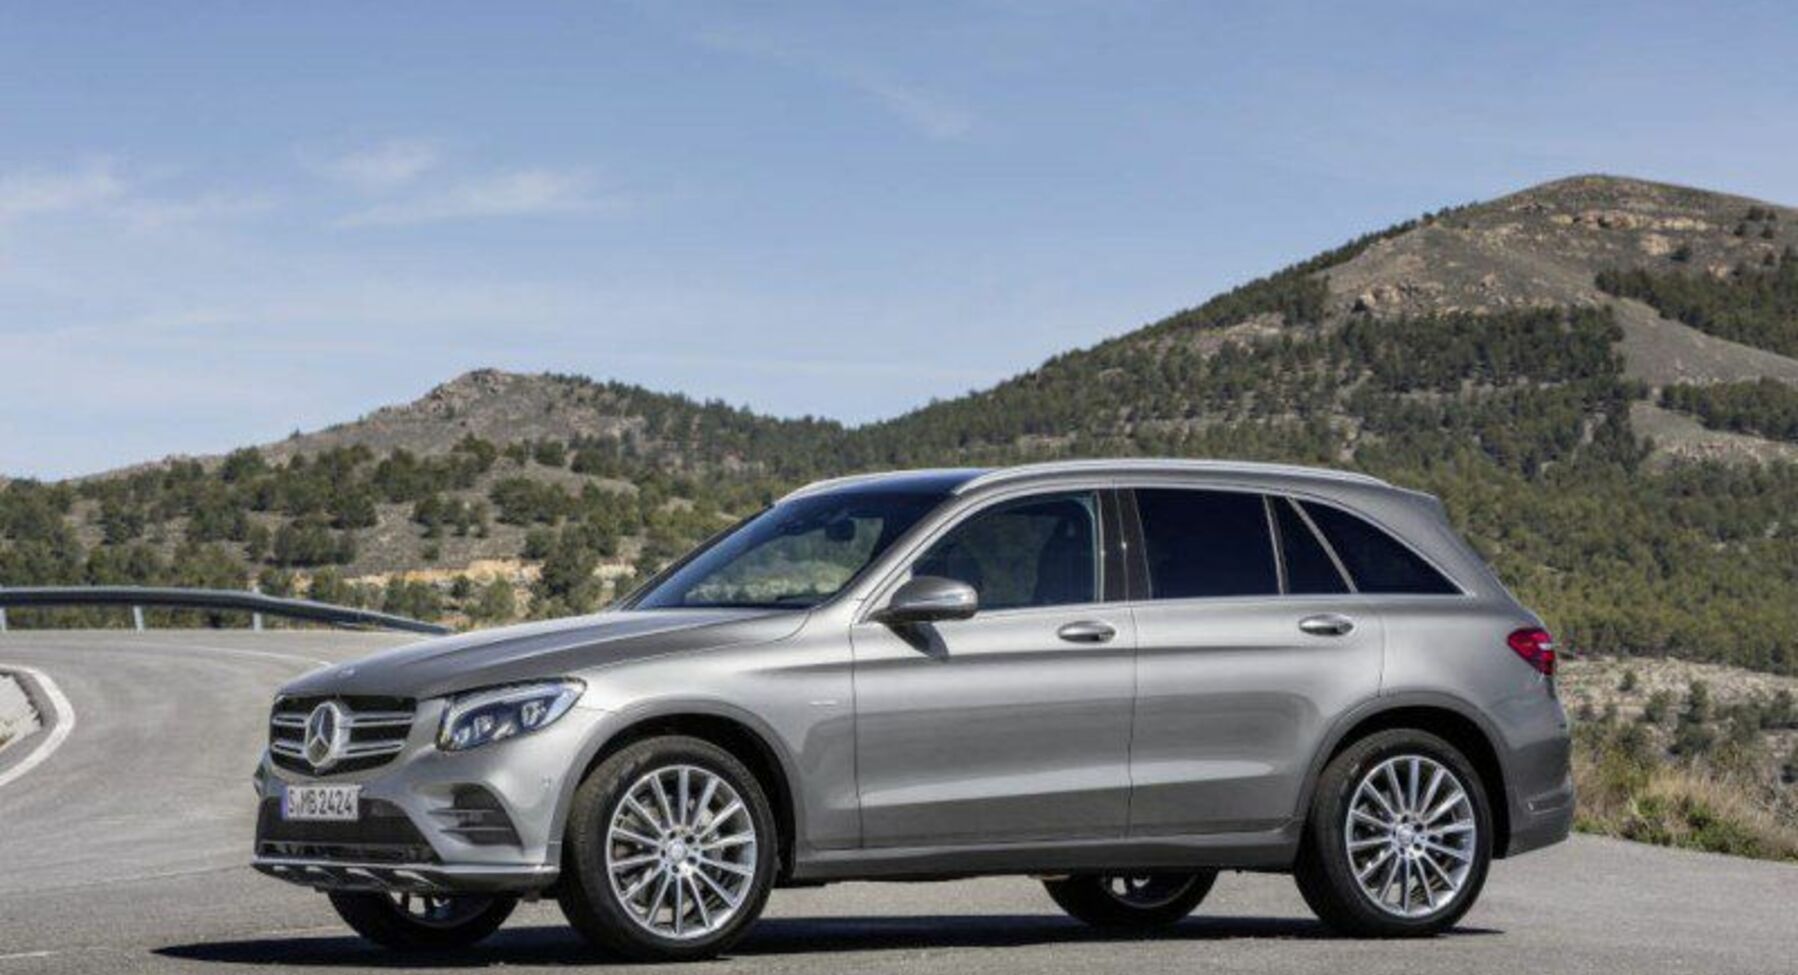 Mercedes-Benz GLC SUV (X253) F-CELL 13.5 kWh (211 Hp) 4MATIC 2019, 2020 